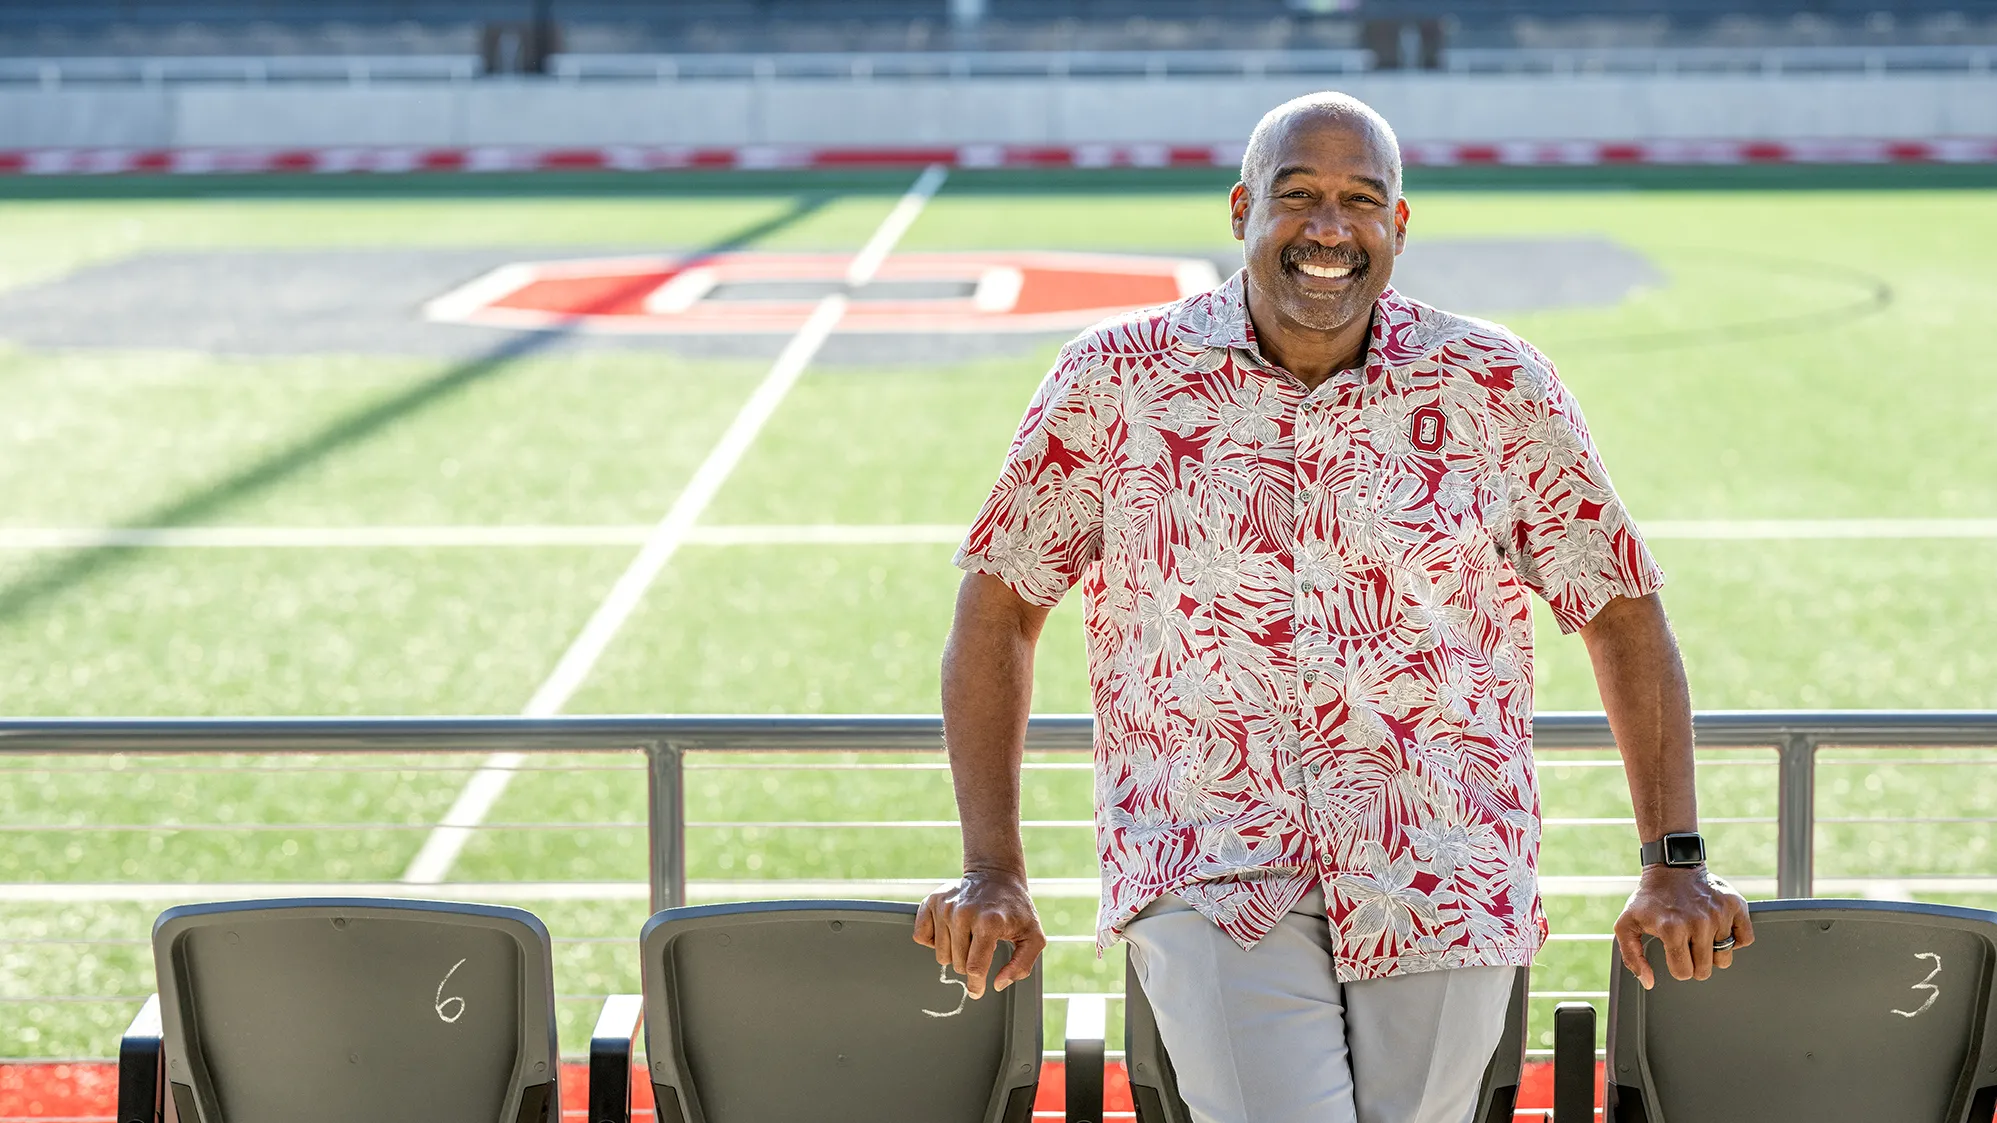 Wearing an Ohio State-colored tropical shirt—that looks perfect for retirement or vacation—Gene Smith grins as he leans on some front-row seats at Ohio Stadium.